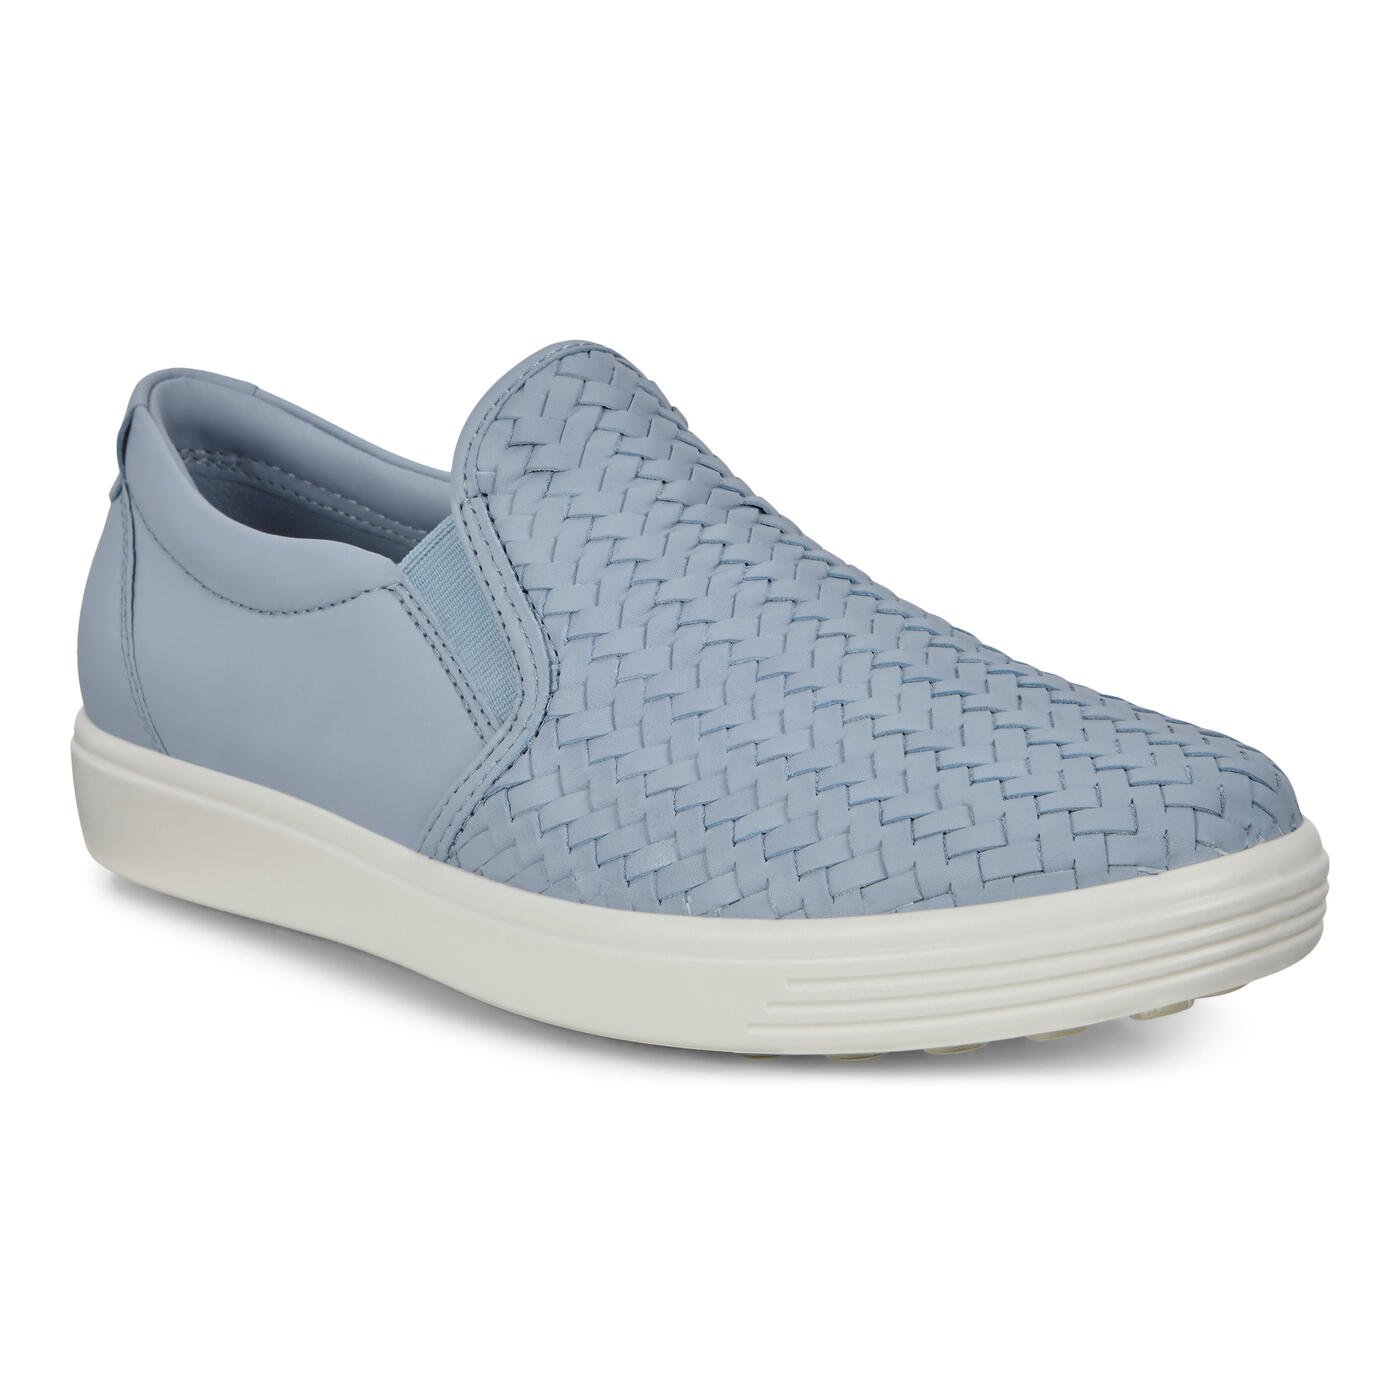 Women's Soft 7 Slip-on Shoes | Order Today | ECCO® Shoes